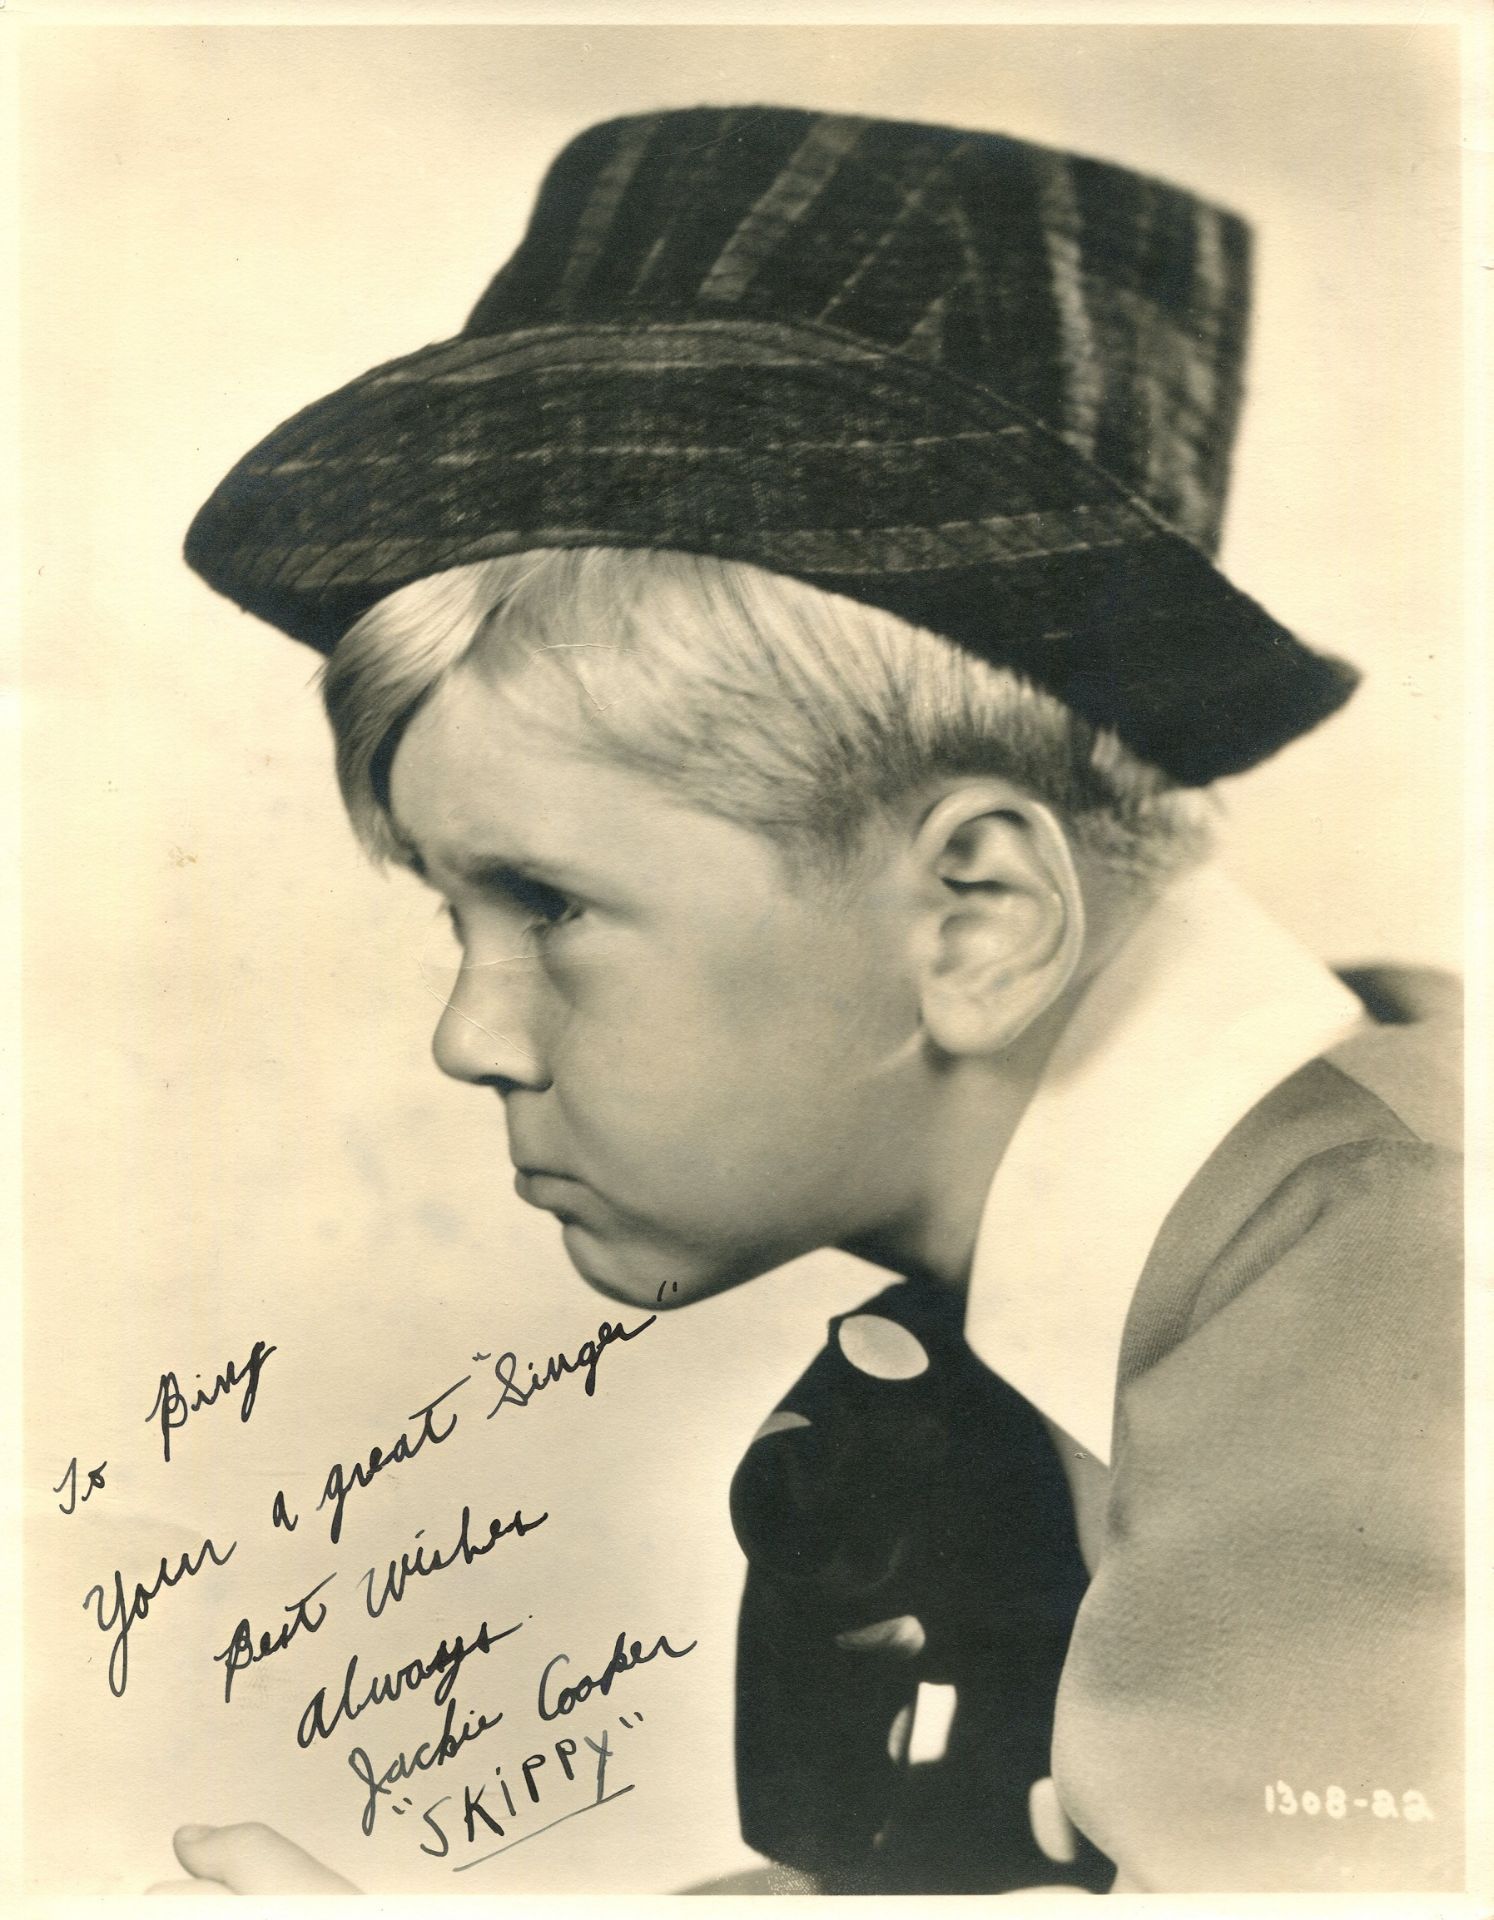 COOPER JACKIE: (1922-2011) American child actor, an Academy Award nominee.